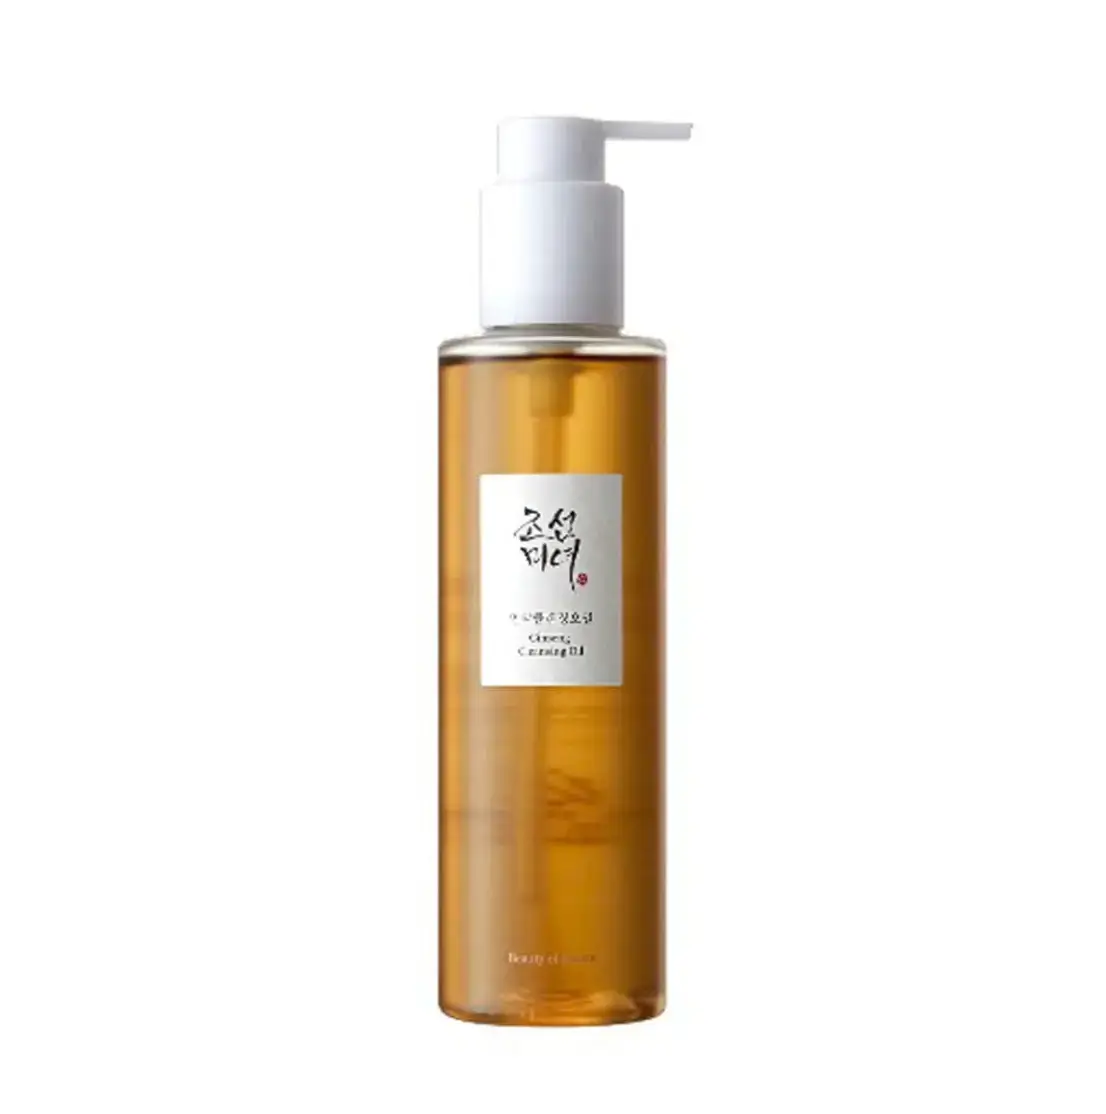 Best korean skincare cleansing oil- beauty of joseon ginseng cleansing oil